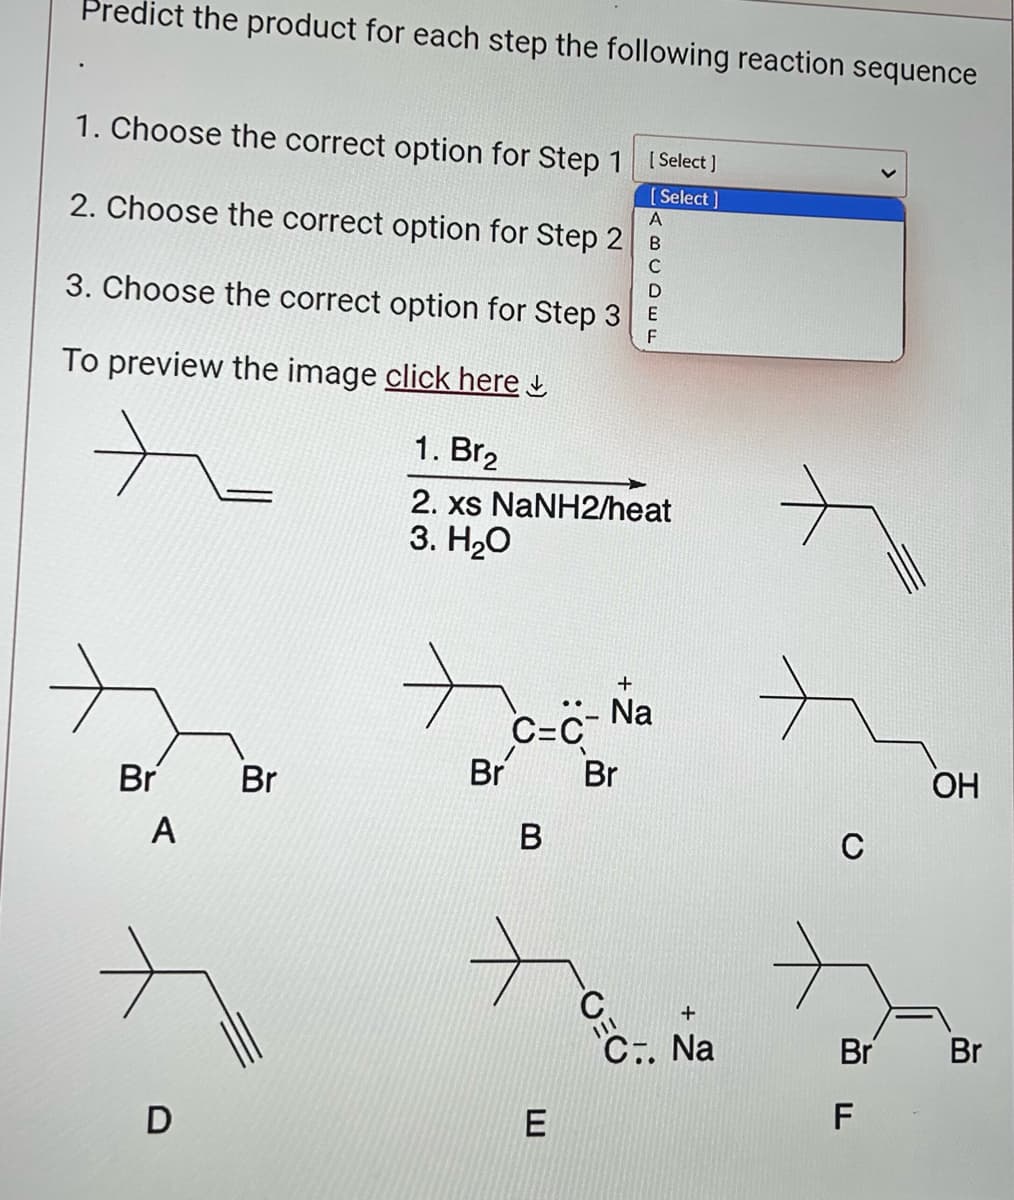 Predict the product for each step the following reaction sequence
1. Choose the correct option for Step 1
[Select]
[Select]
A
2. Choose the correct option for Step 2
B
C
D
3. Choose the correct option for Step 3 E
F
To preview the image click here
1. Br2
2. xs NaNH2/heat
3. H₂O
Br
A
D
Br
Br
C=C
B
E
+
- Na
Br
C.
+
C.. Na
C
Br
F
OH
Br